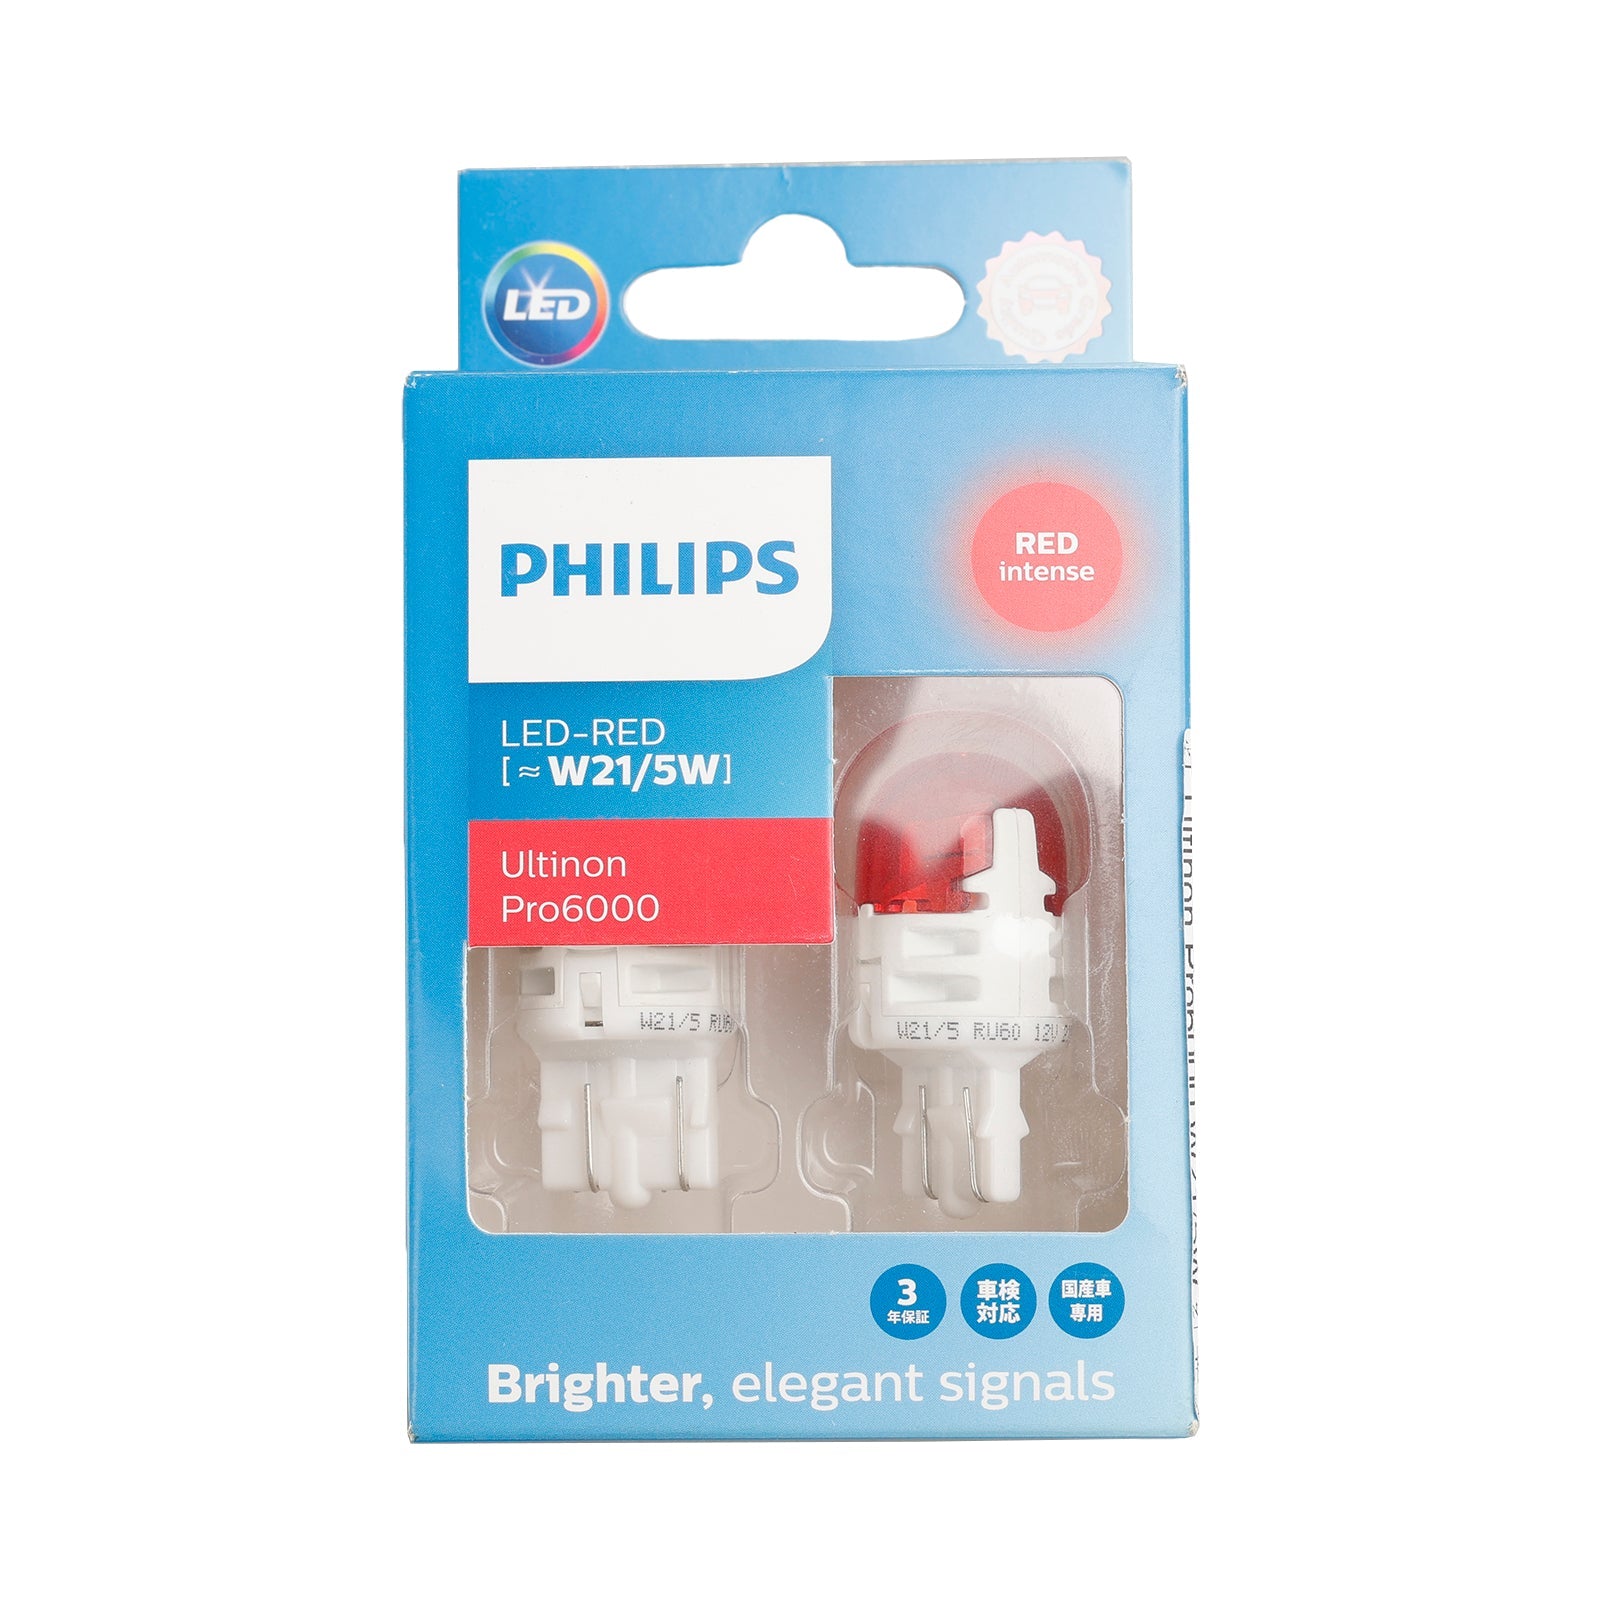 Pour Philips 11066RU60X2 Ultinon Pro6000 LED-ROUGE W21/5W Rouge intense 75/15lm